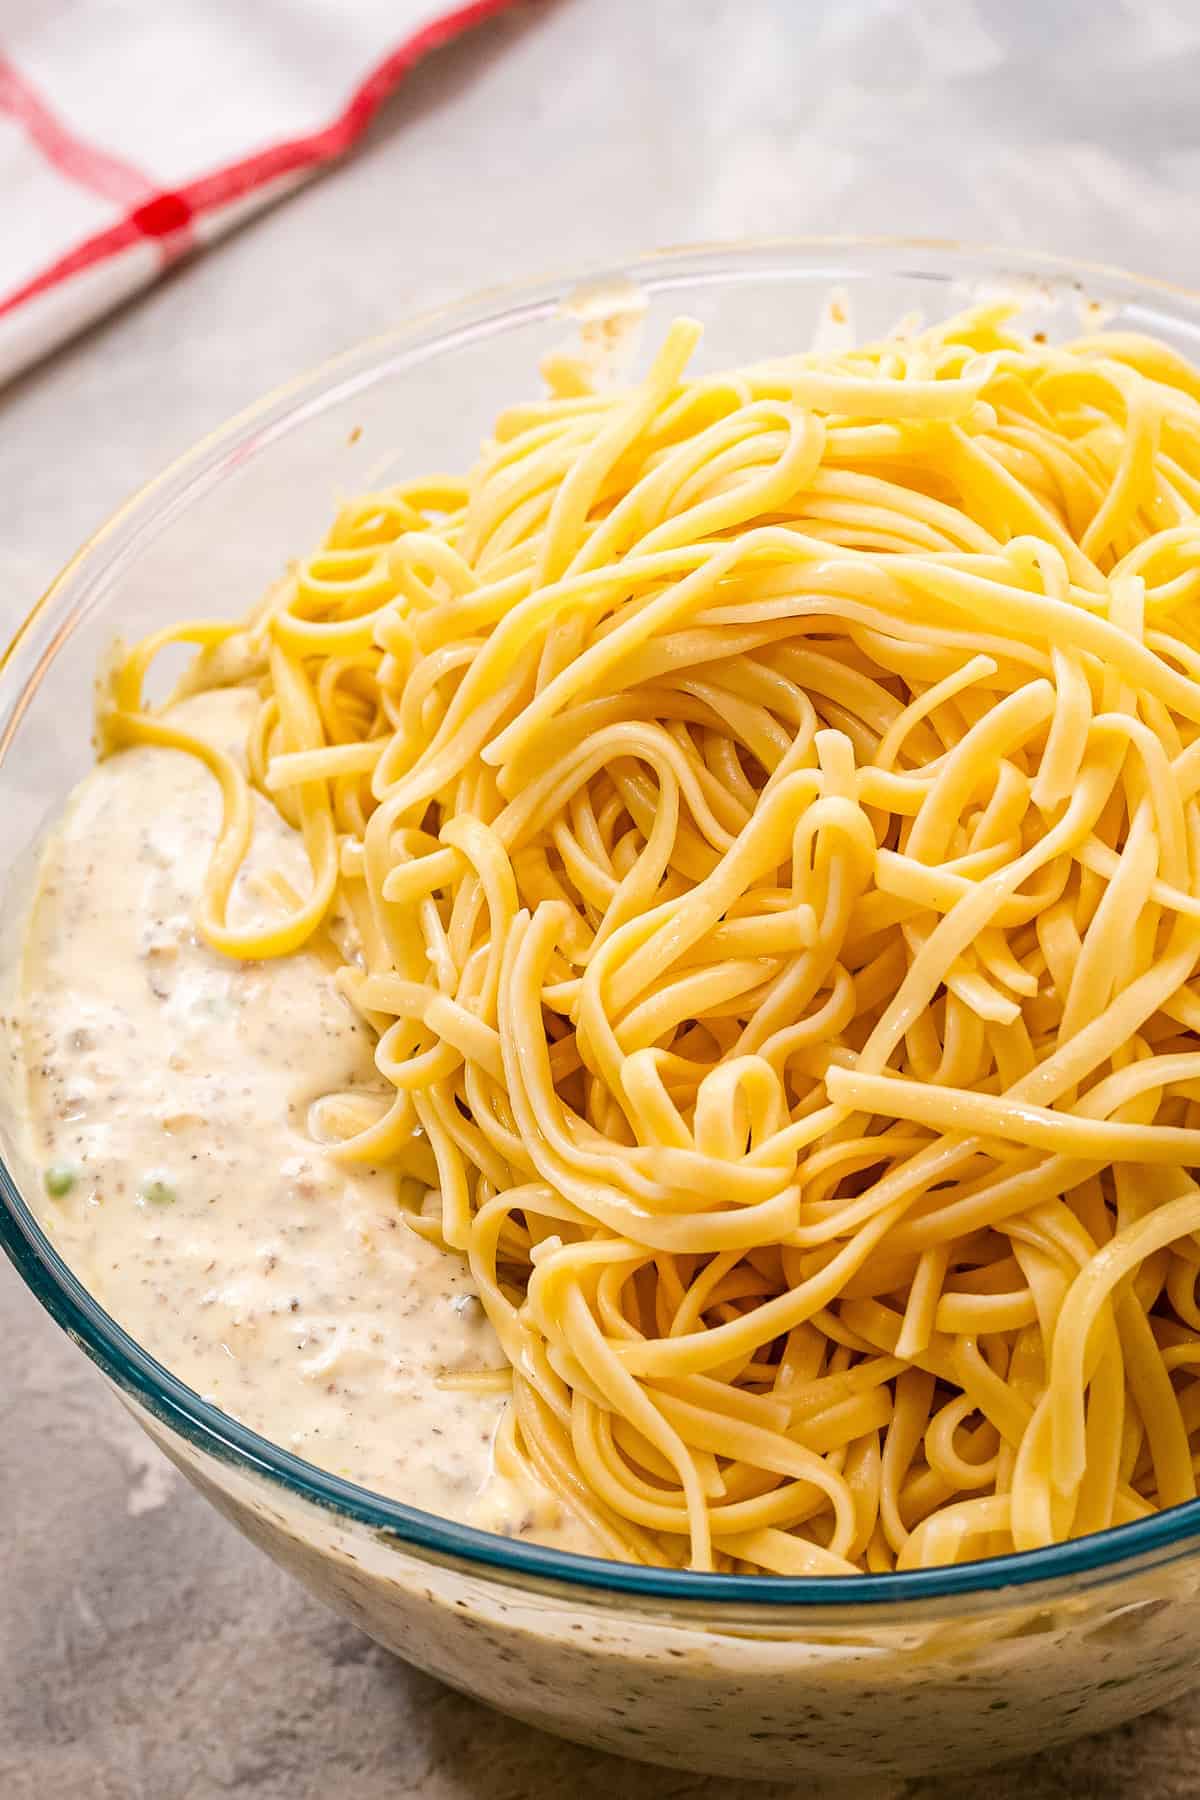 Noodles added to creamy tetrazzini mixture in bowl